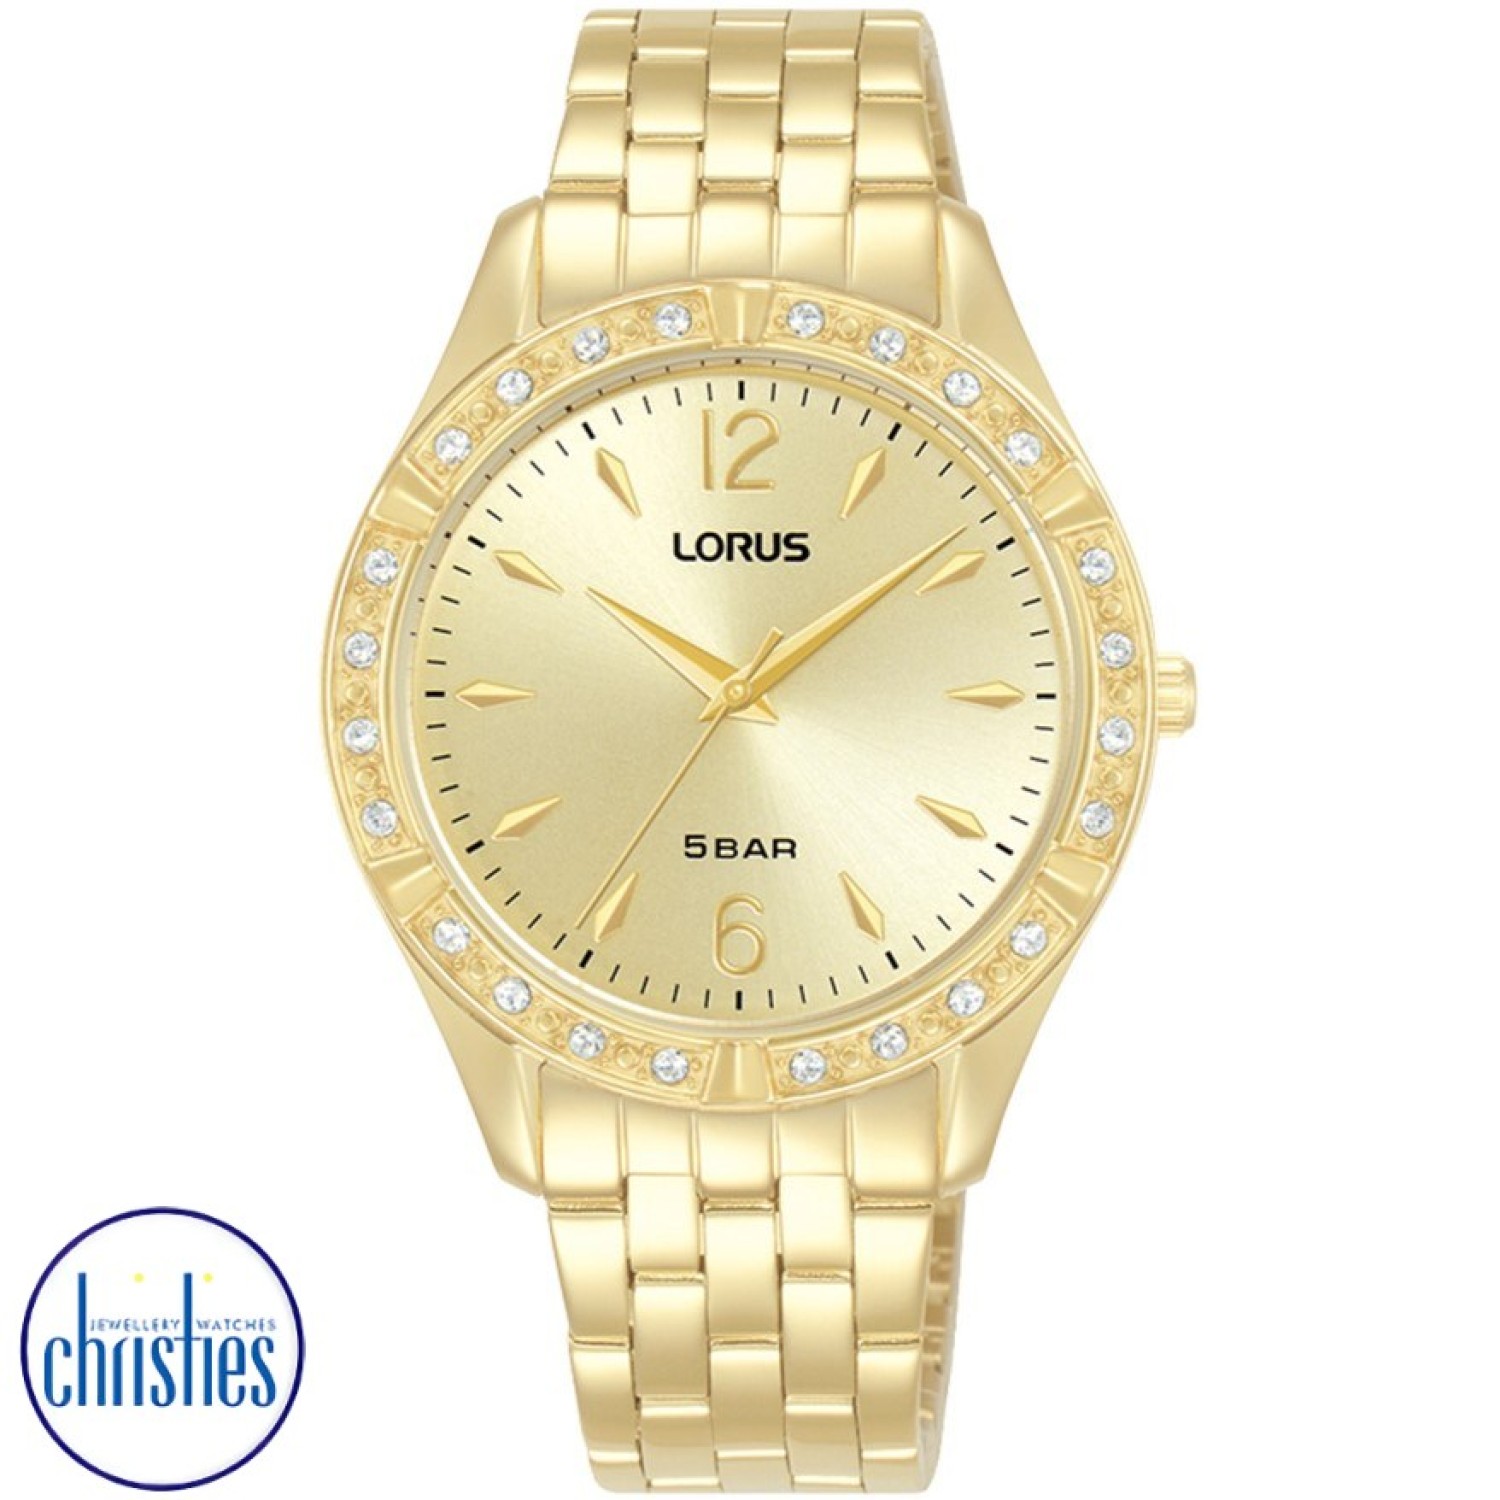 RG268WX9 Lorus Ladies Dress Analogue Watch RG263WX9 Lorus by Seiko Auckland s offers a diverse range of watch styles, including analog, digital, sports, and dress watches